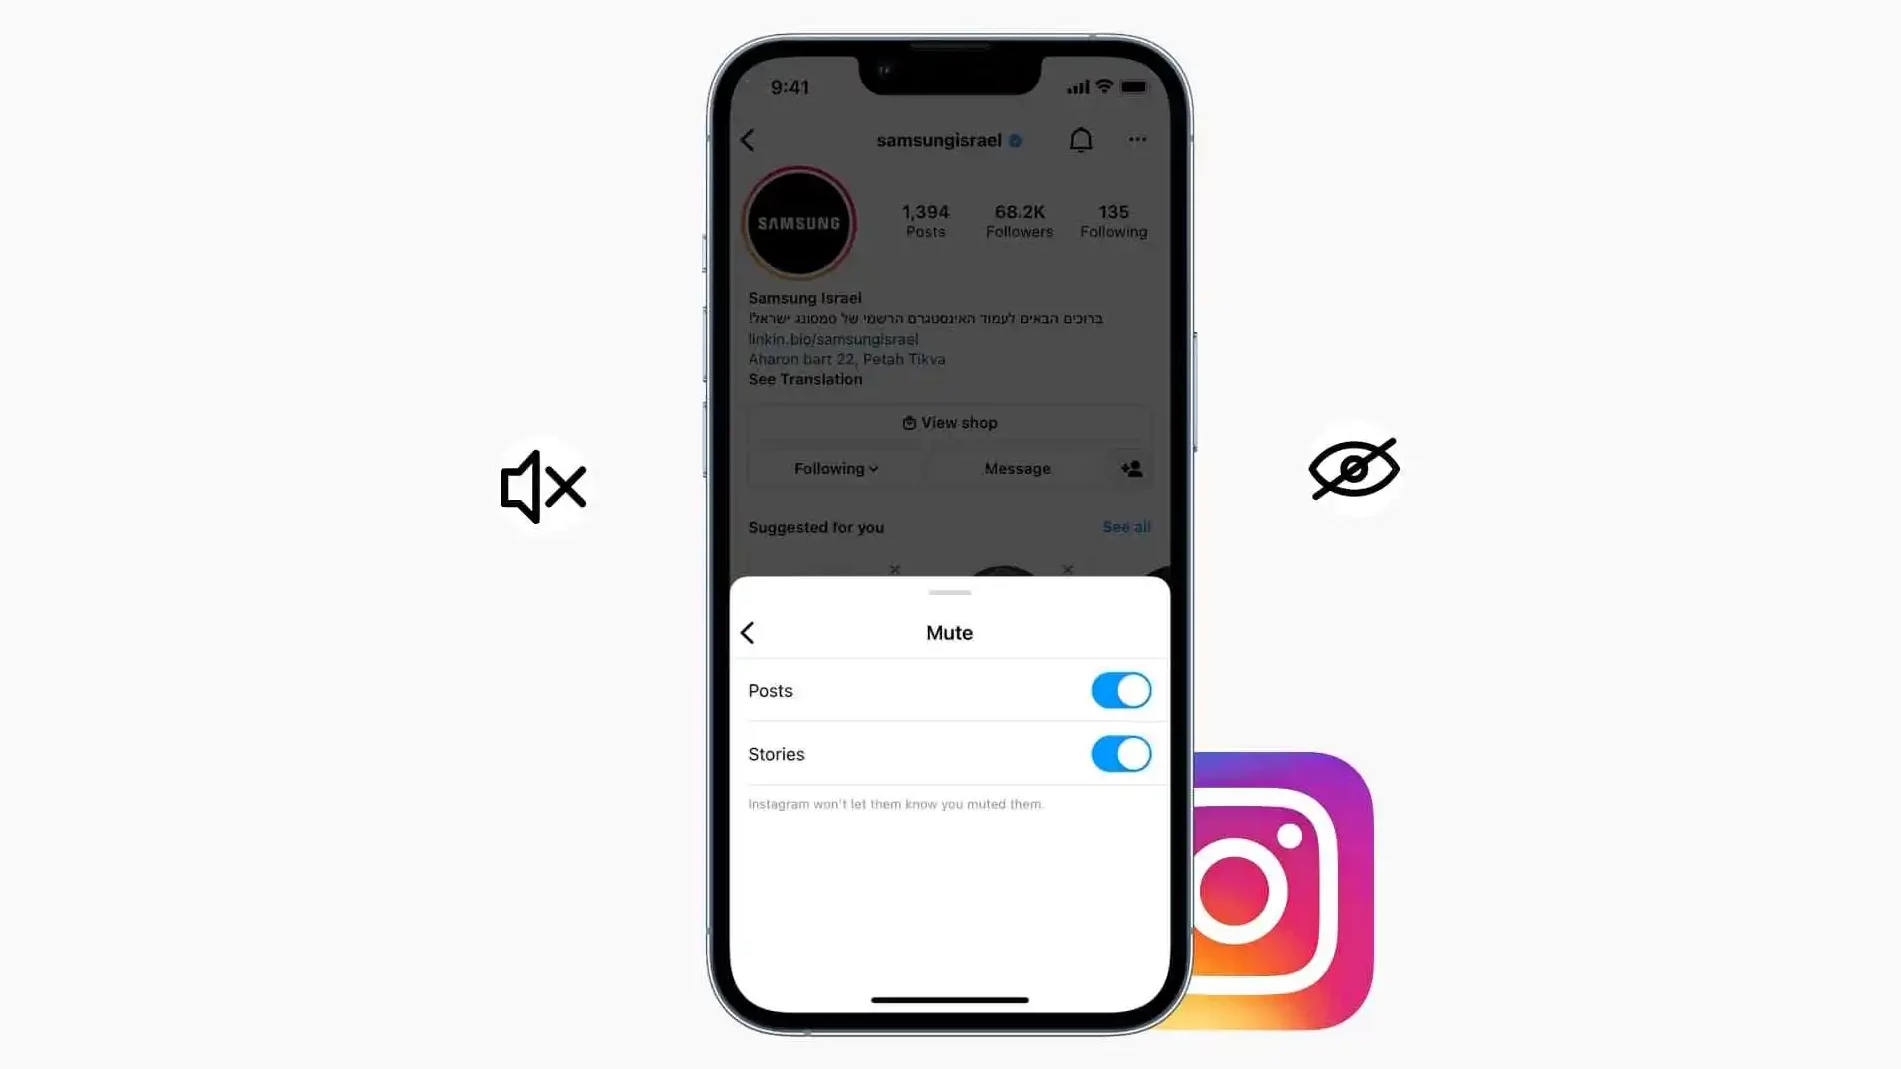 How To Know If Someone Muted You On Instagram | 3 Ways To Check!